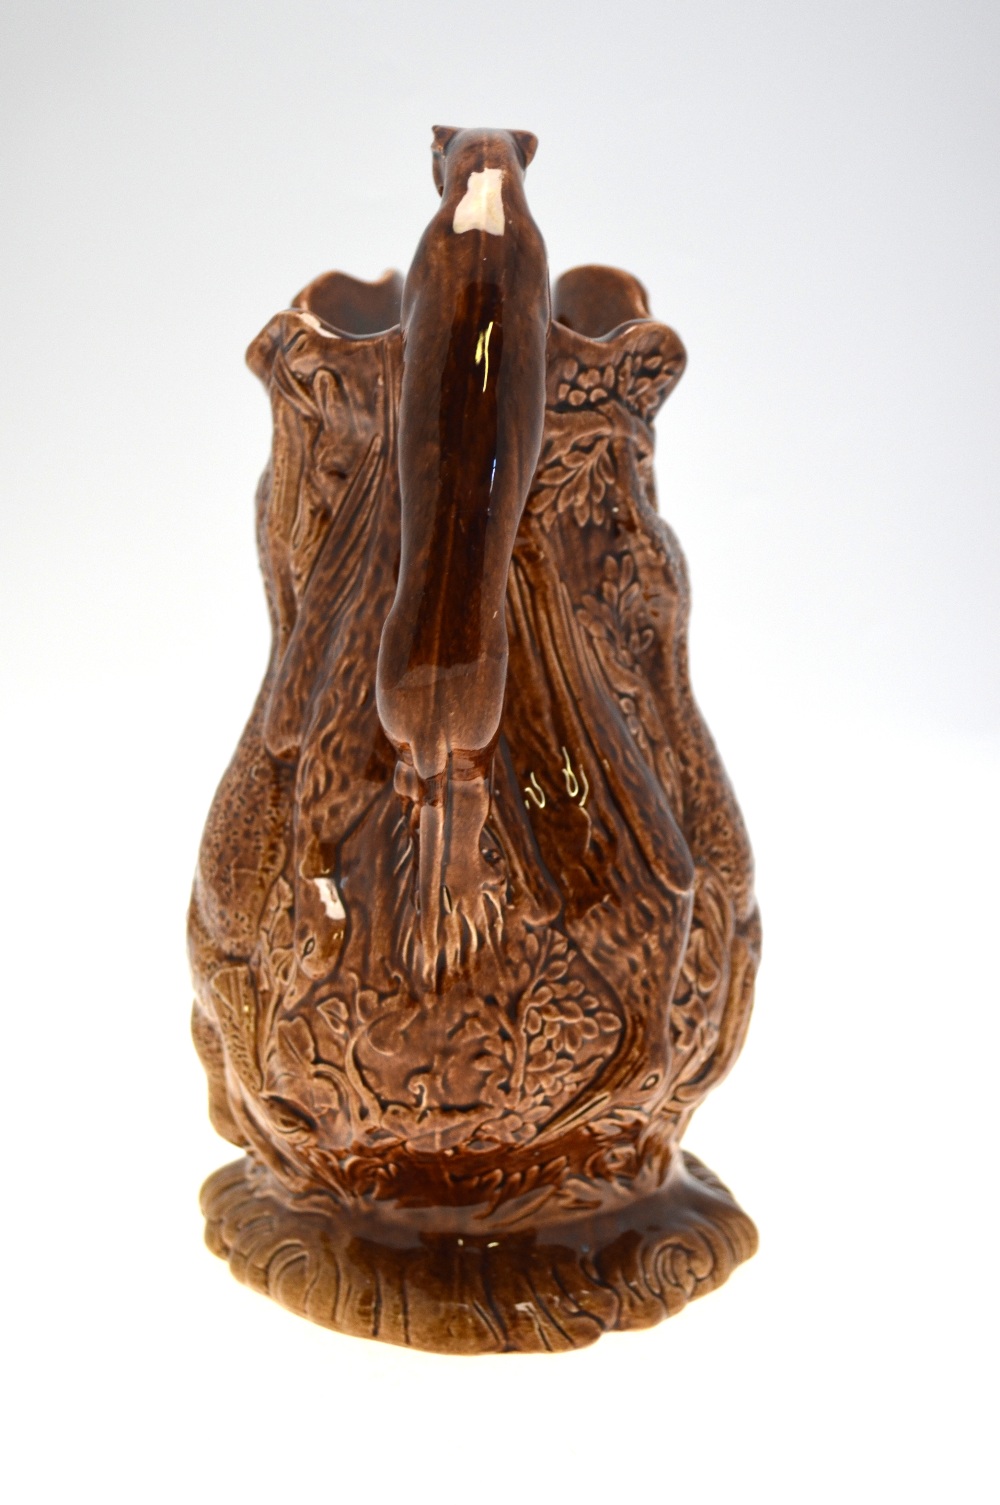 A 19th century brown glazed jug moulded with game - rabbits, ducks, fox, etc. - Image 3 of 5